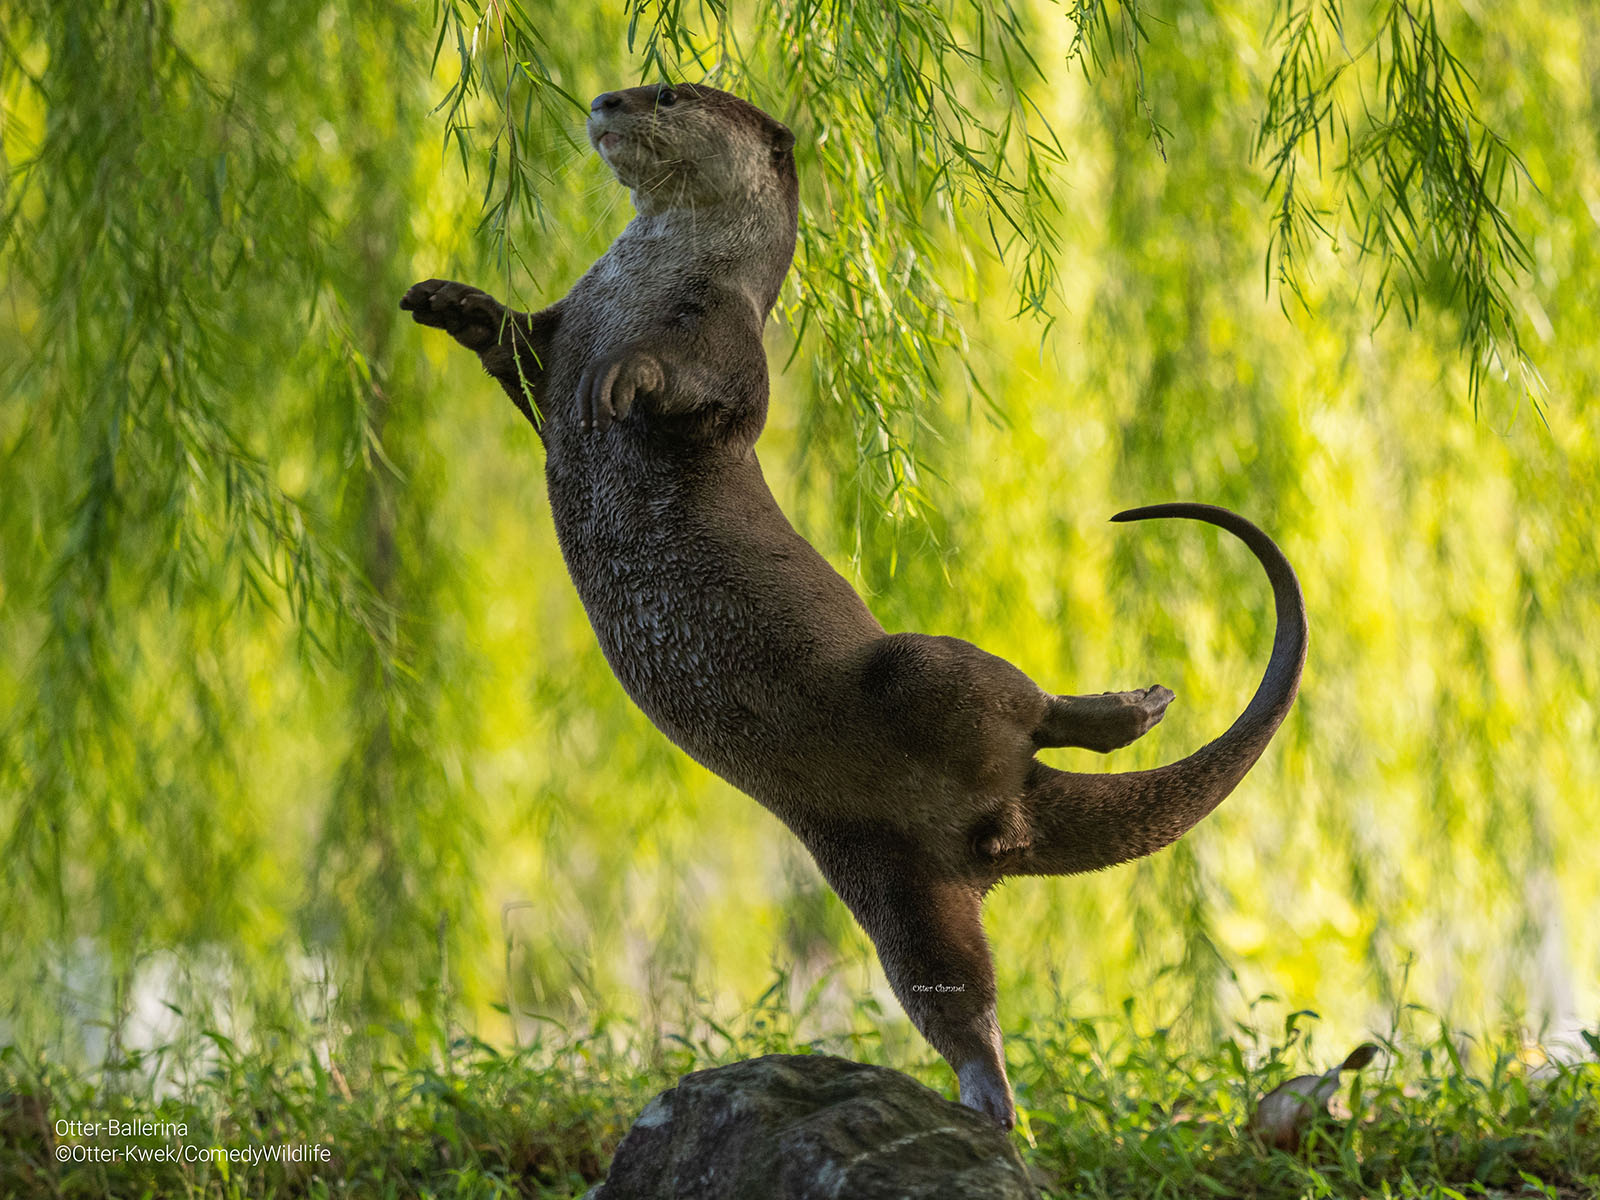 An otter looks as if it's been captured mid-dance.